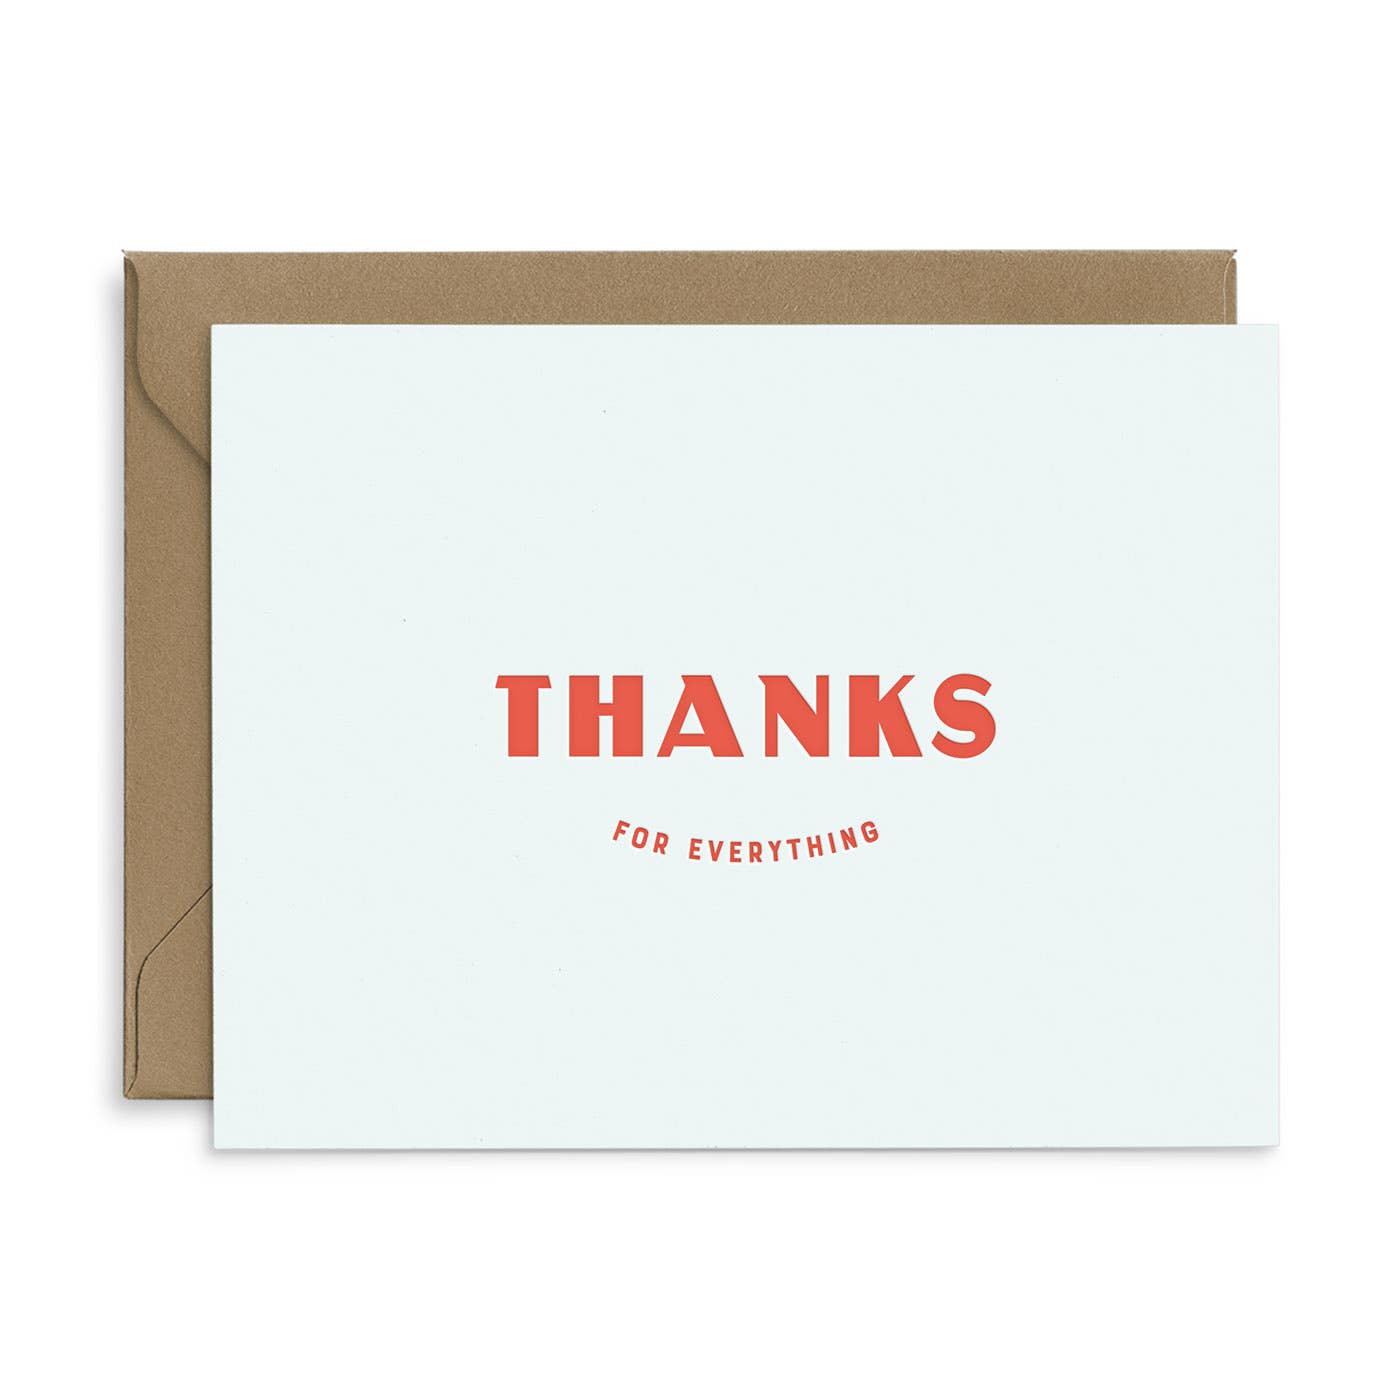 Thanks For Everything Thank You Card